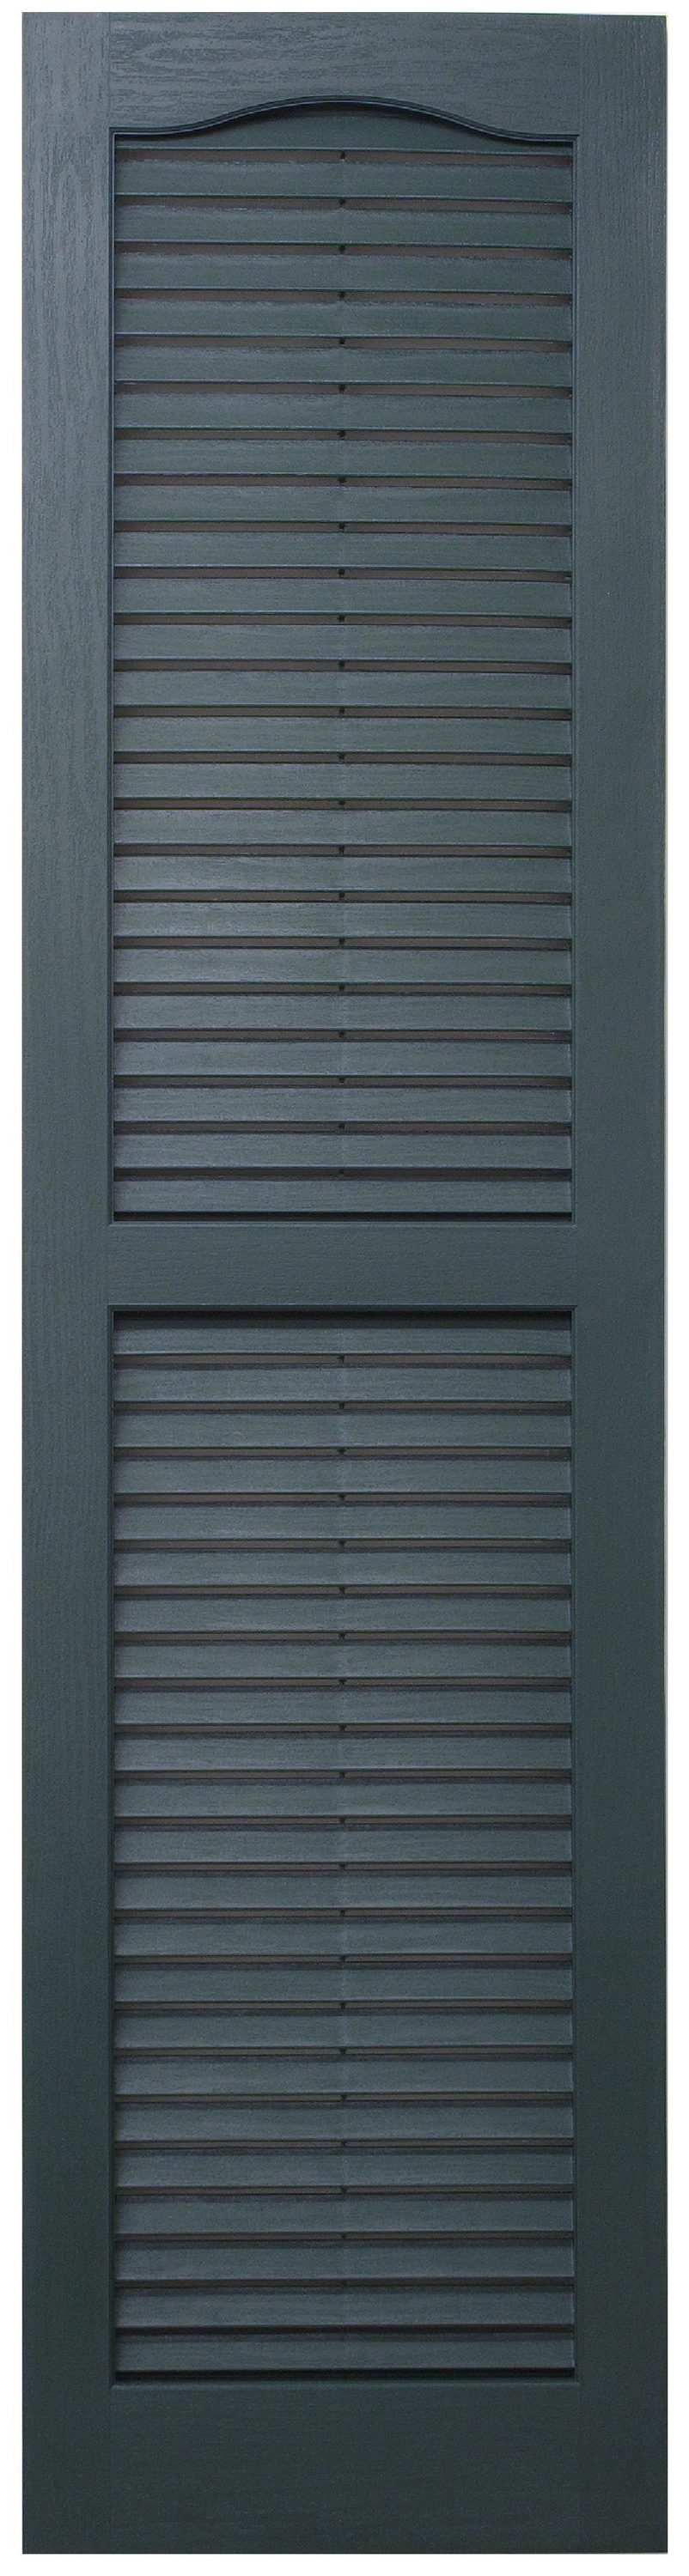 Severe Weather 2-Pack 3 color Raised/Louvered Panel 15x47in.Vinyl Ext Shutters 